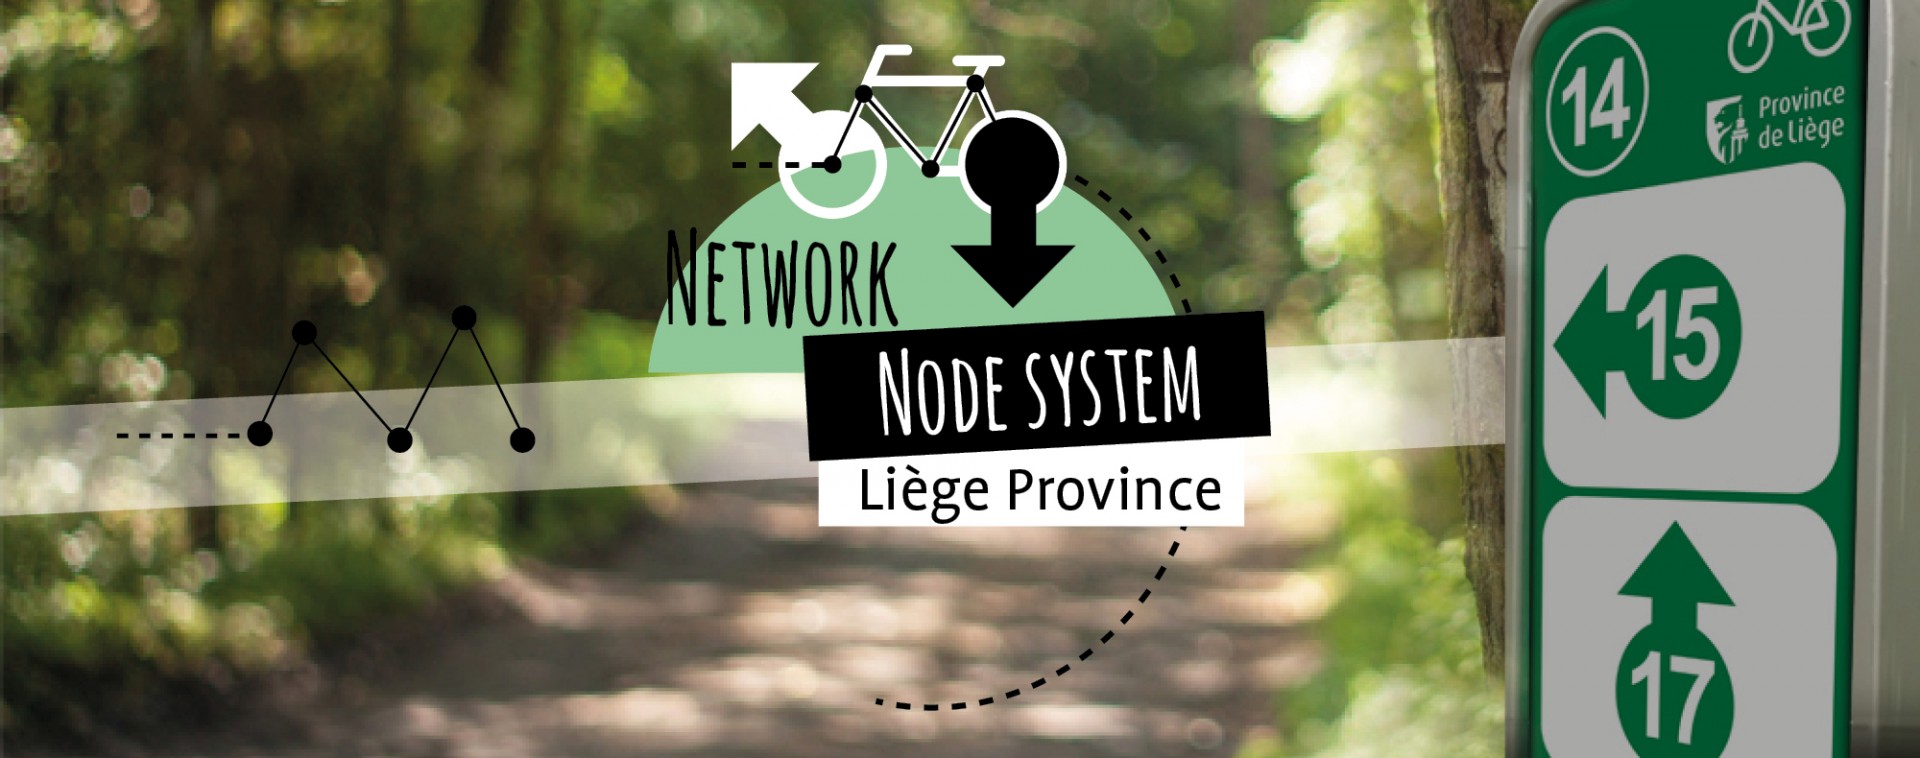 Node-system cycle tourism in the province of Liège | © FTPL